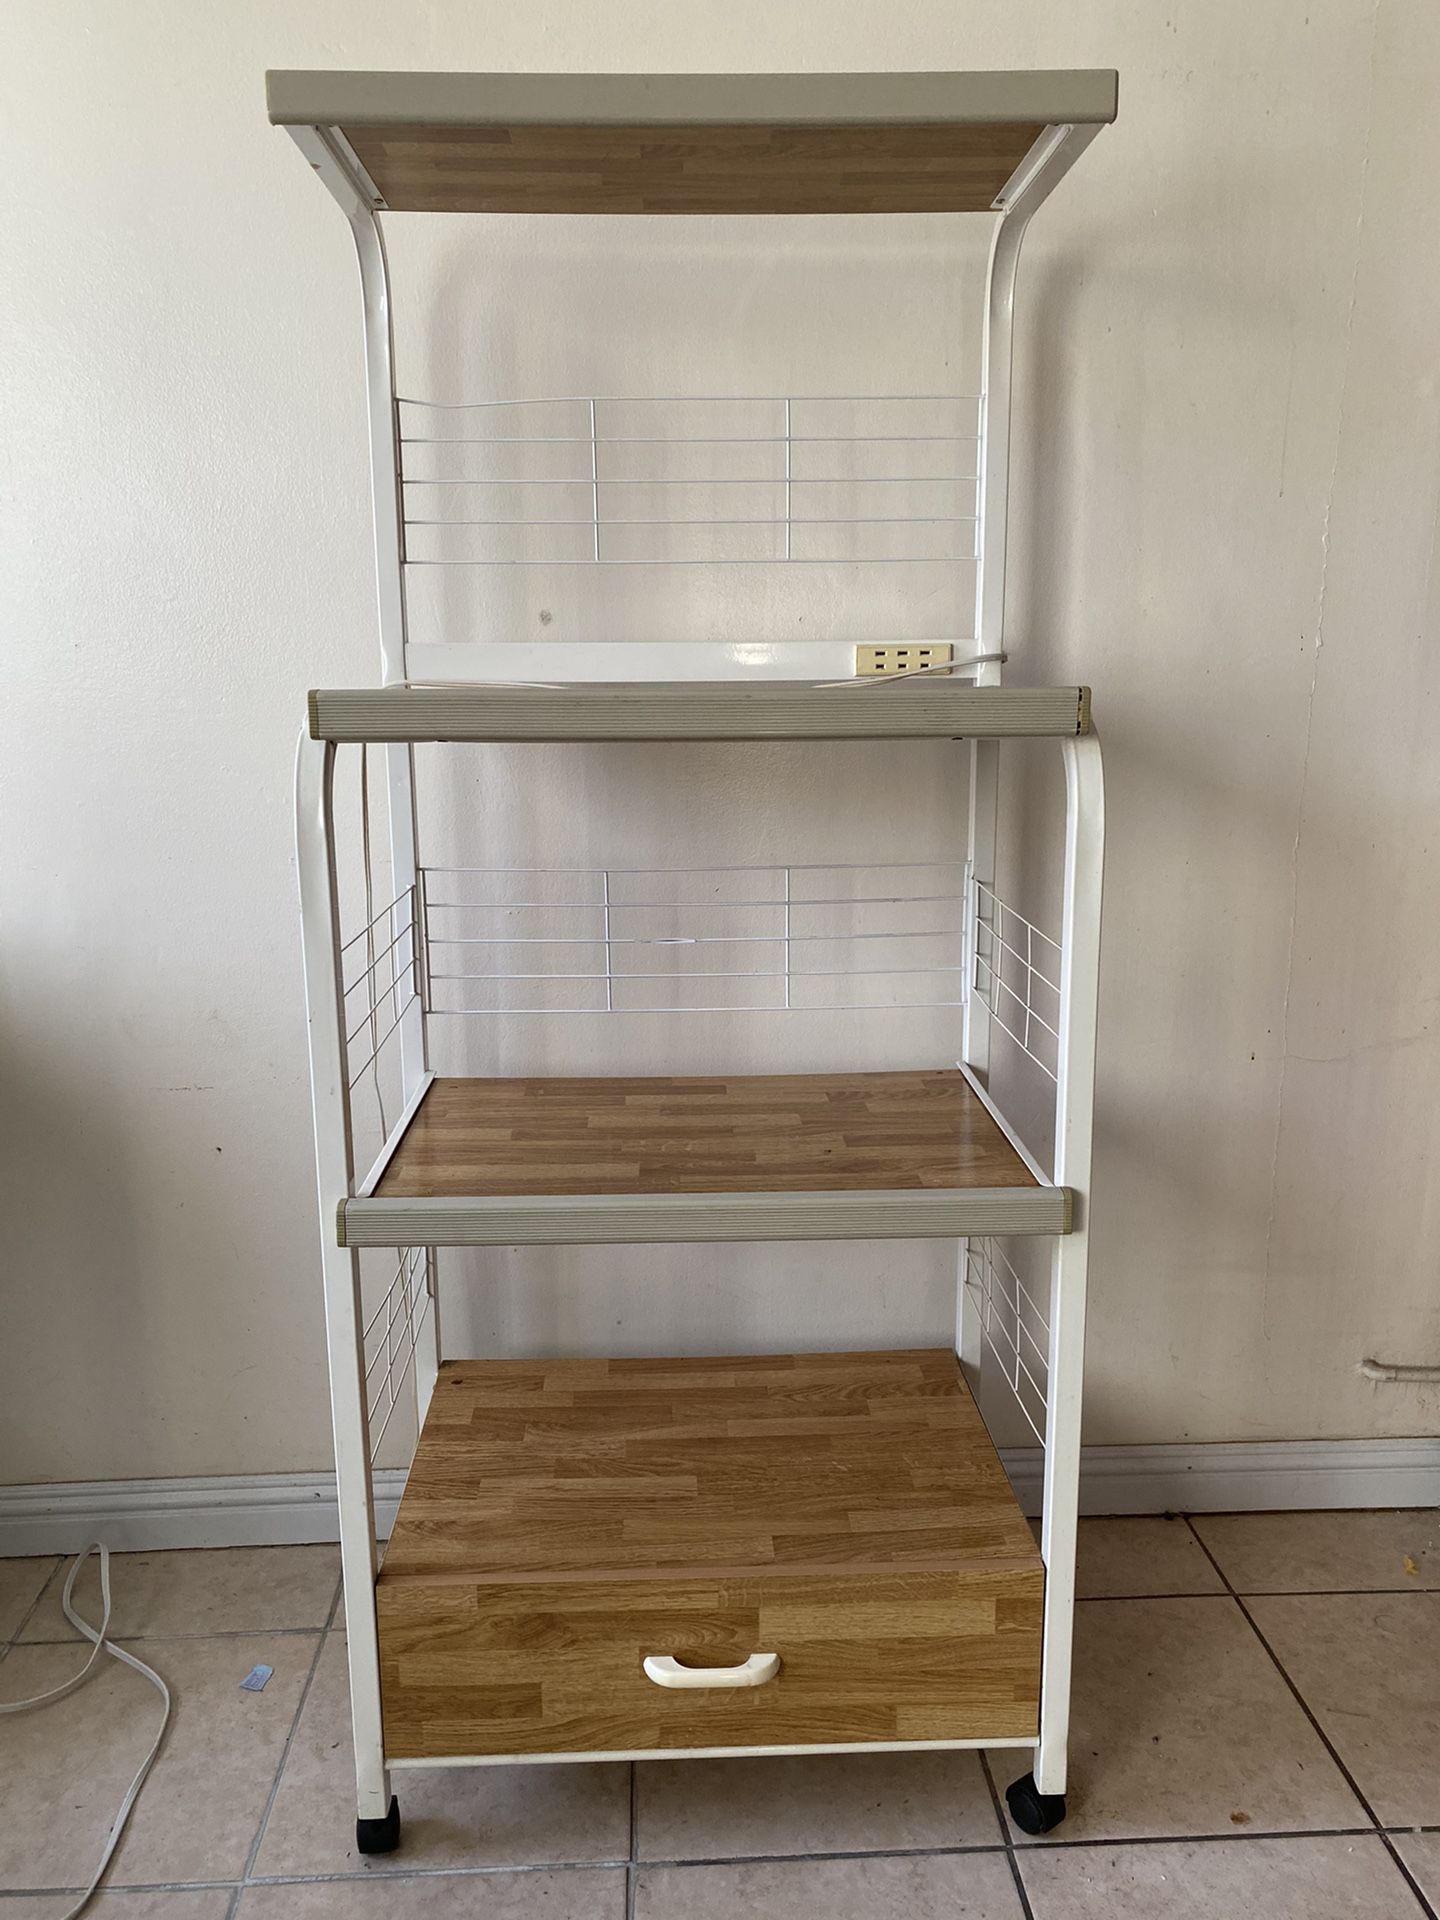 Kitchen Shelving Unit on Wheels with Outlet